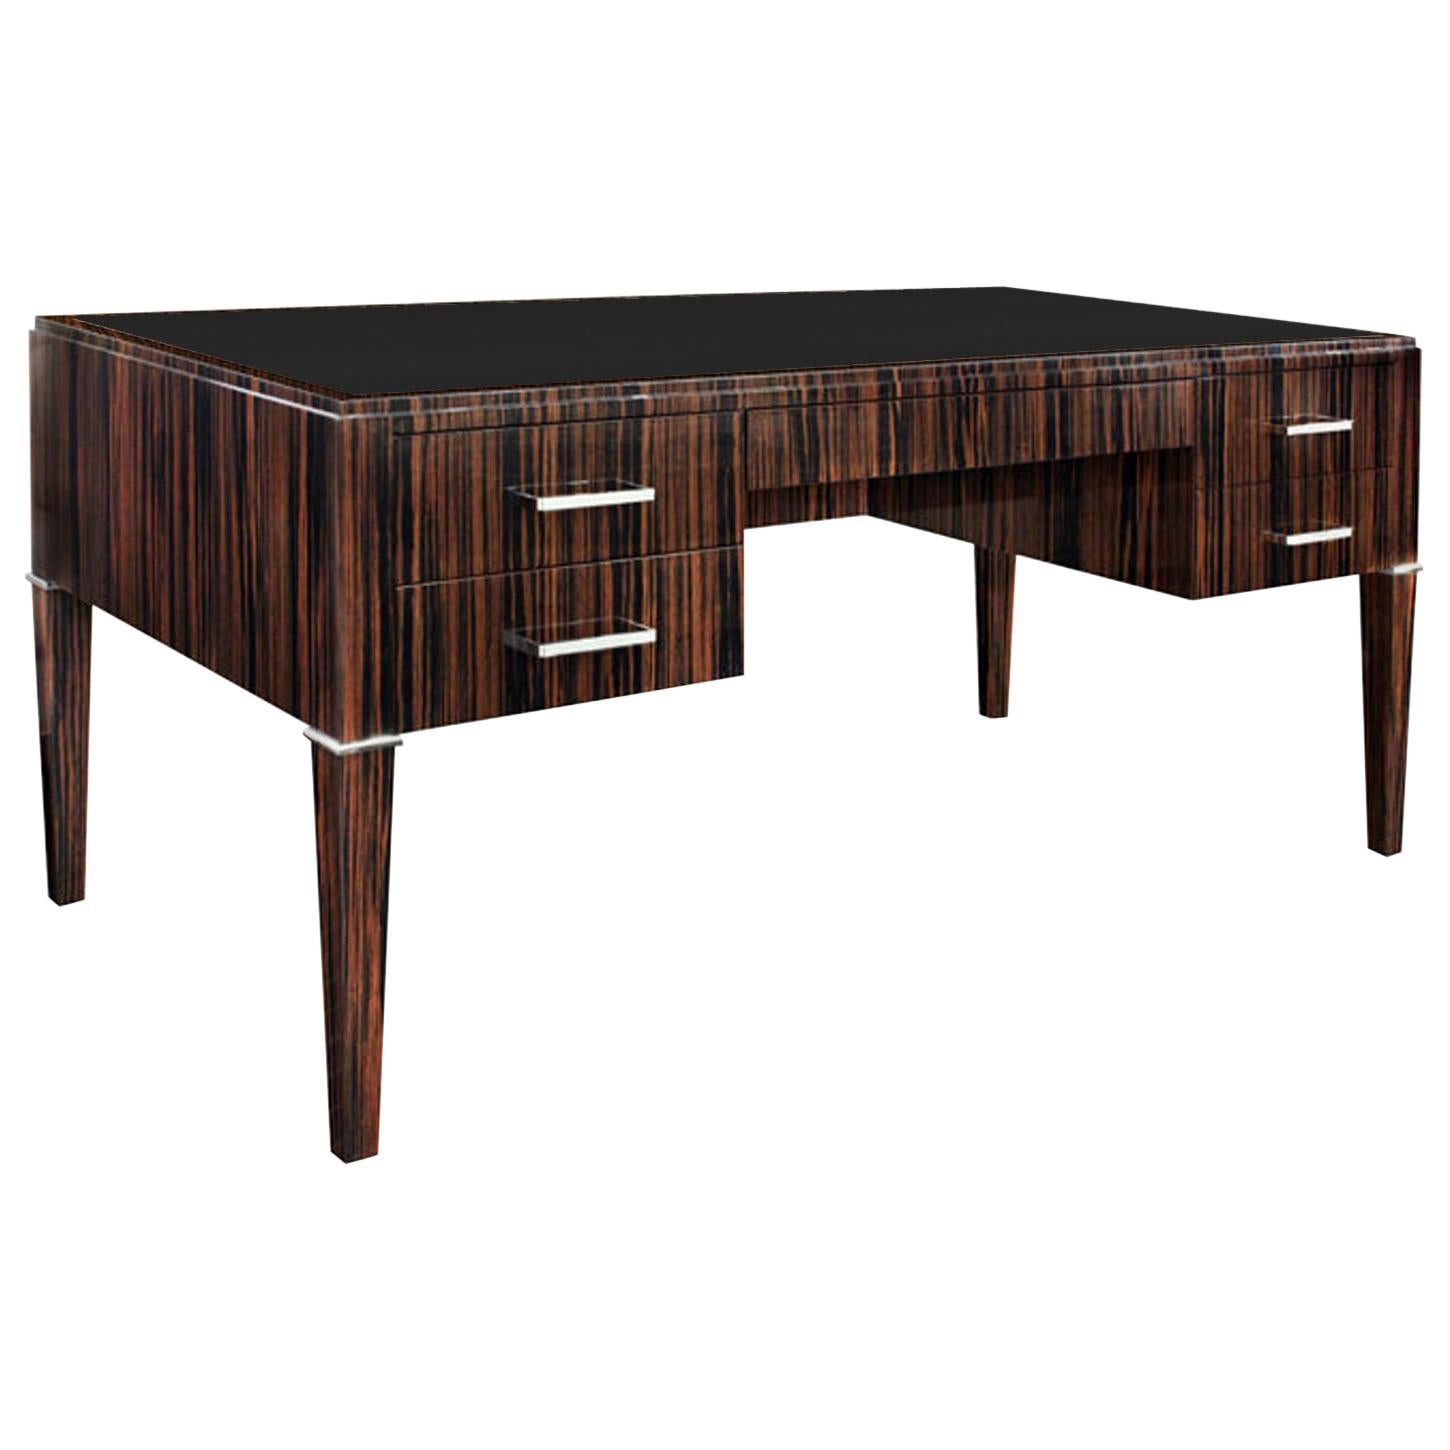 Lobel Originals Desk in Macassar Ebony with Leather Top, Made to Order For Sale